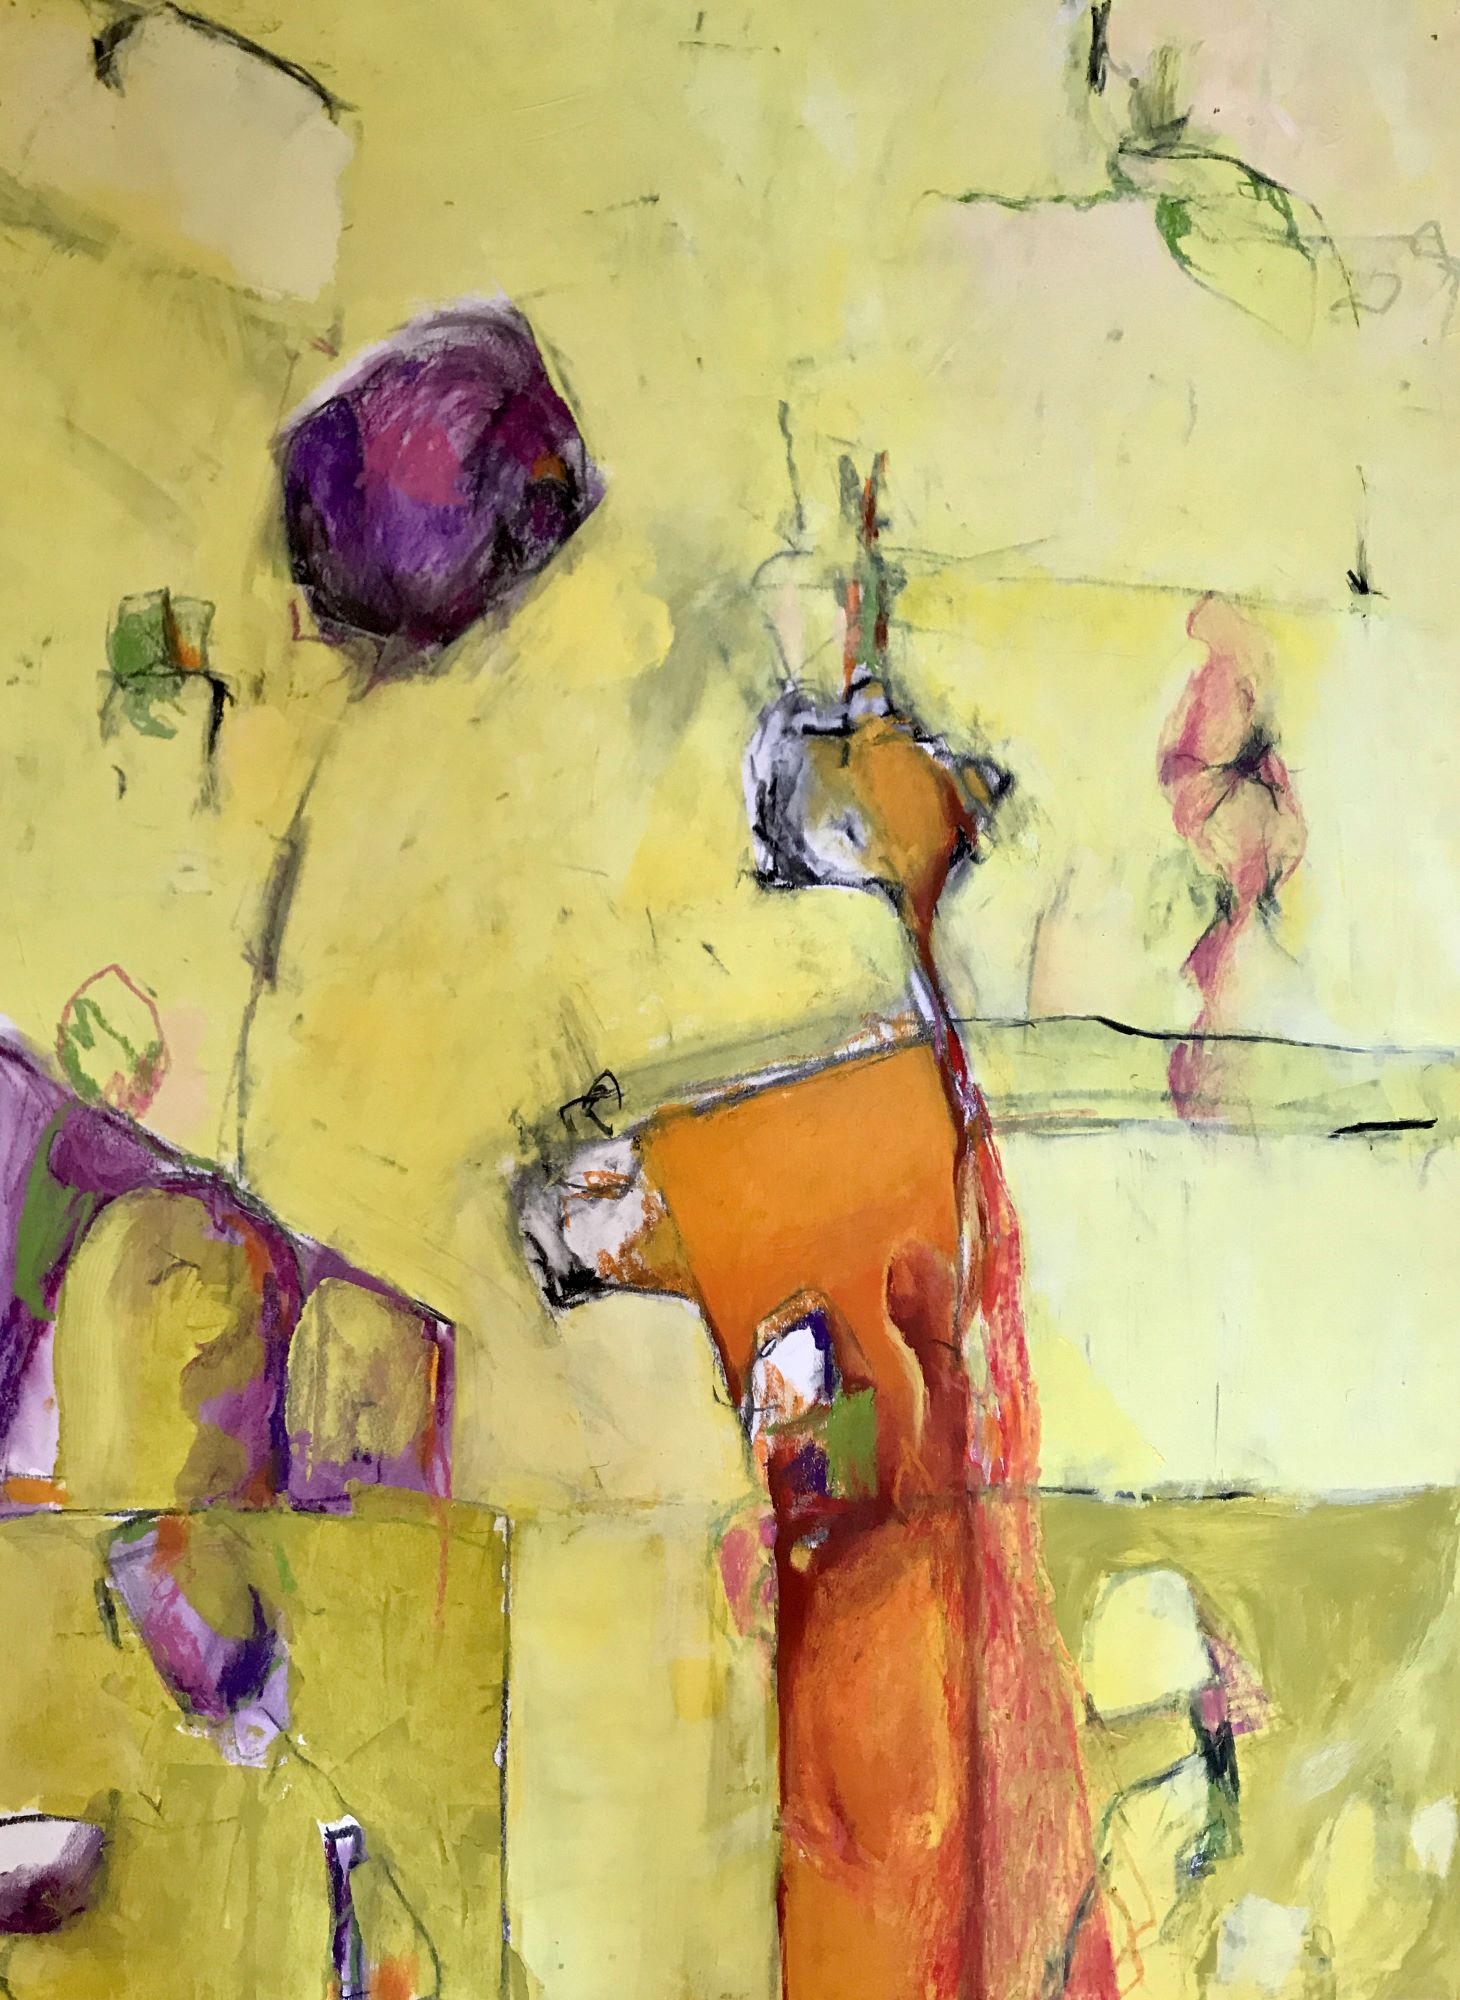 Looking for Clues I - Oil, wax, charcoal on paper, by Karen Chapman